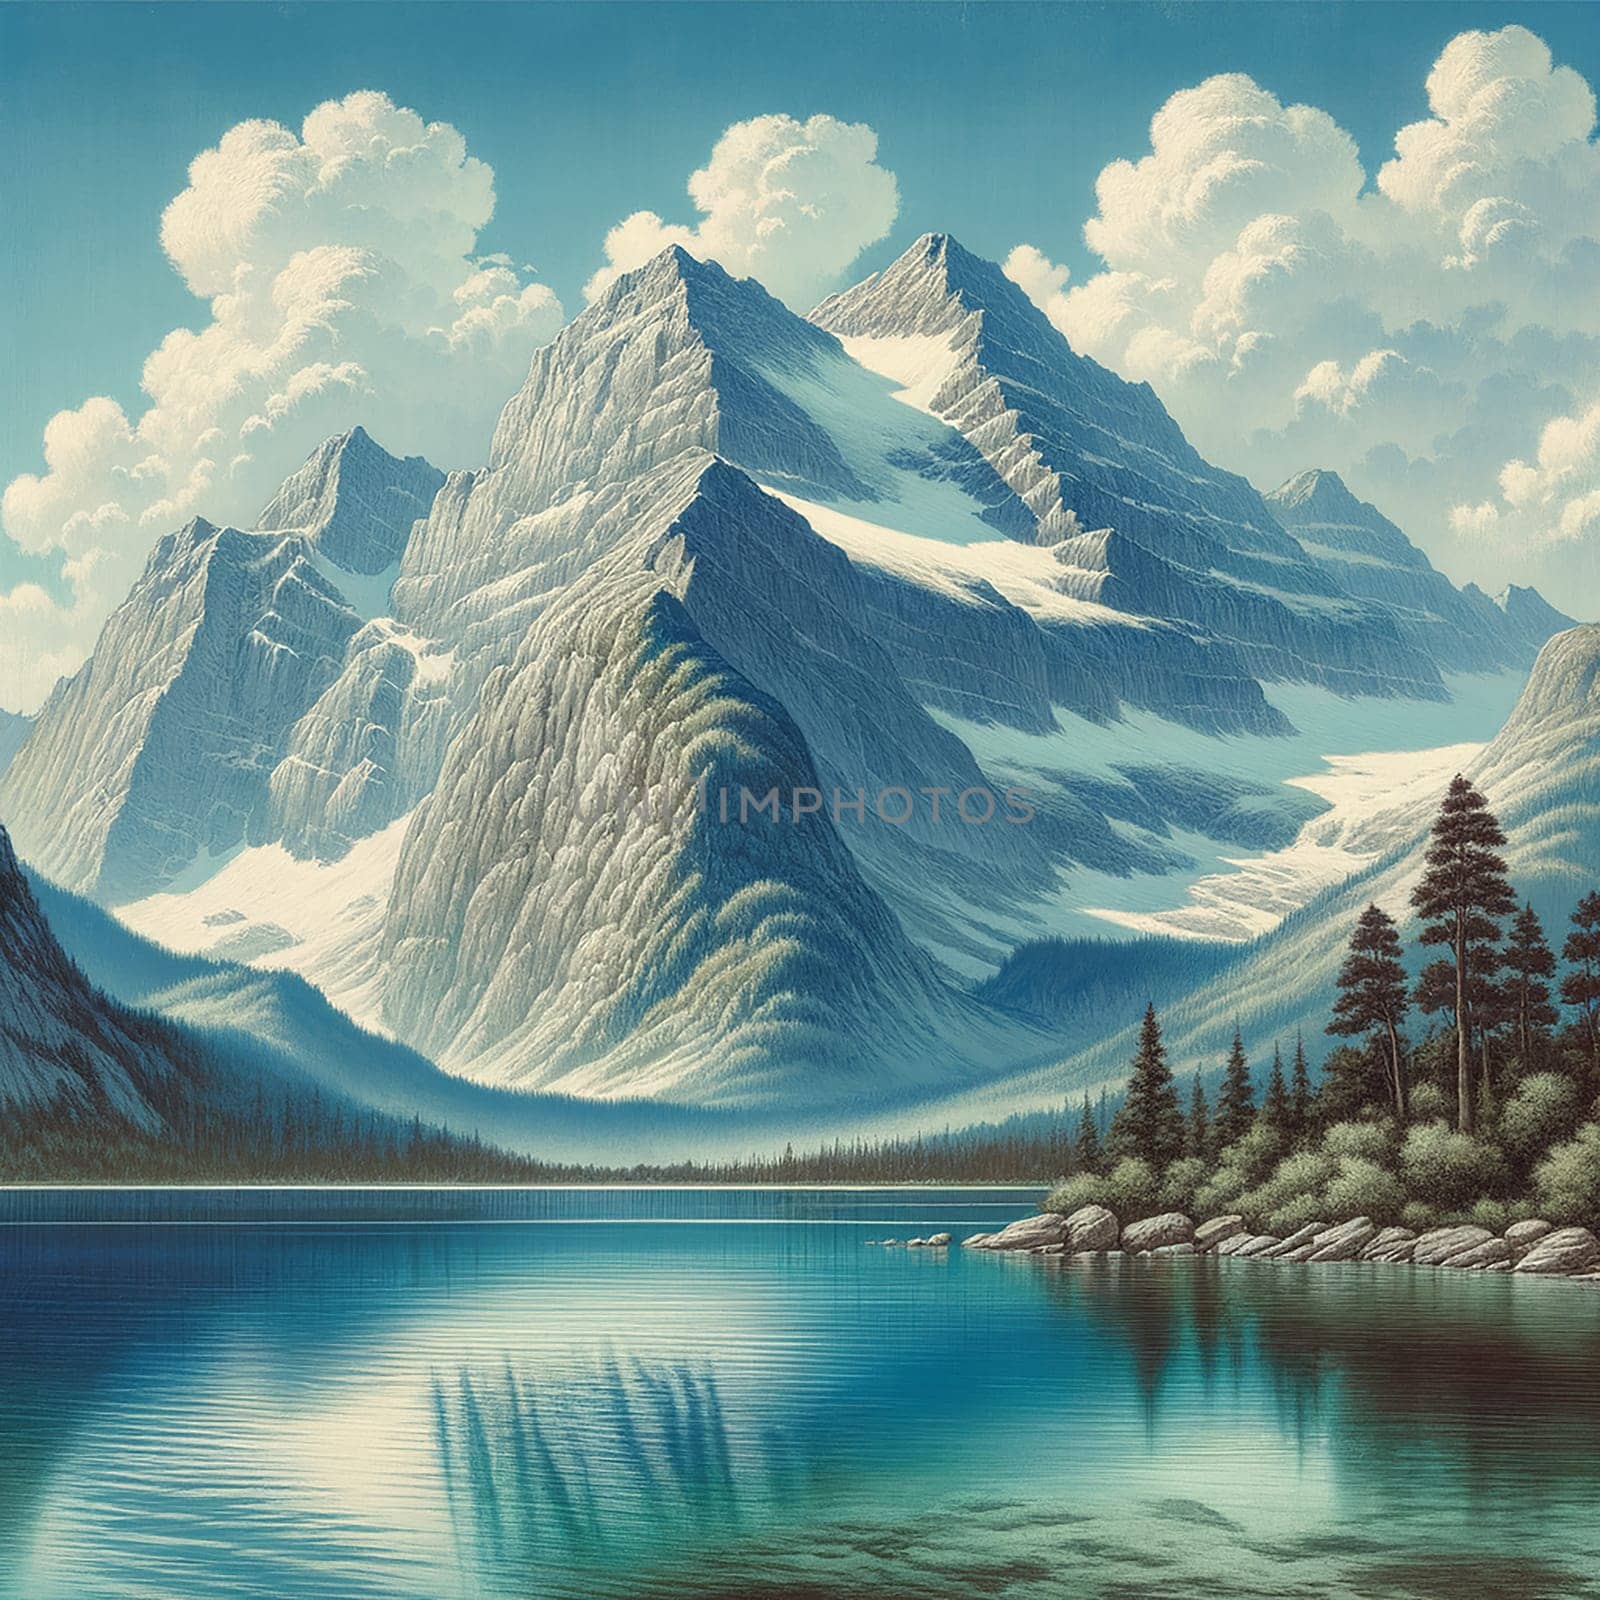 Mountain Majesty: A Tranquil Lake Painting"